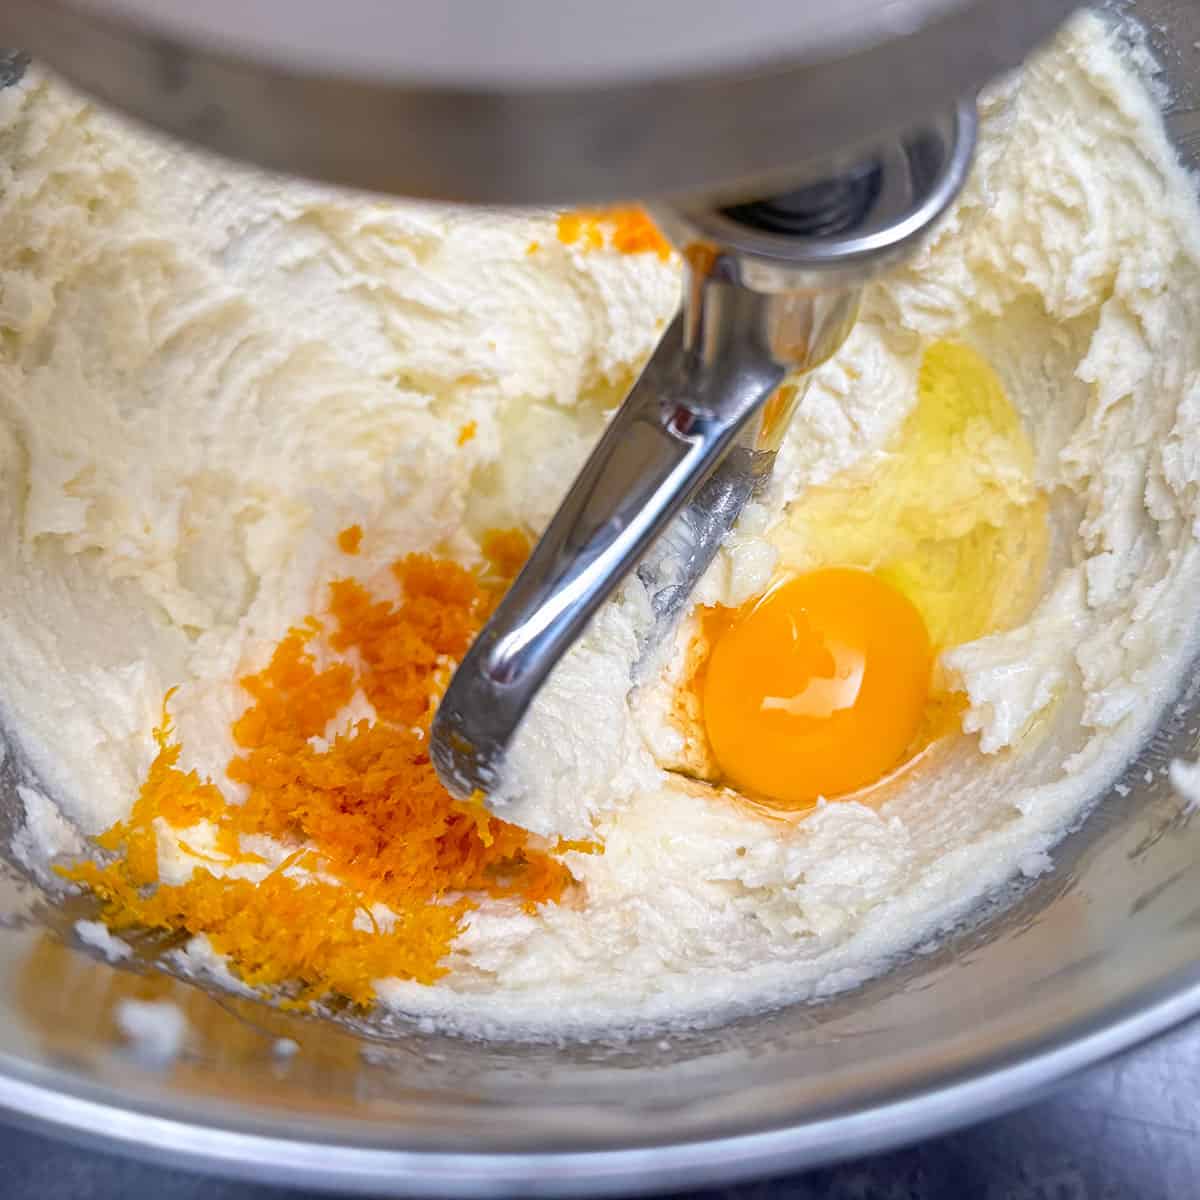 Orange zest, egg and orange extract added to butter-sugar mixture.